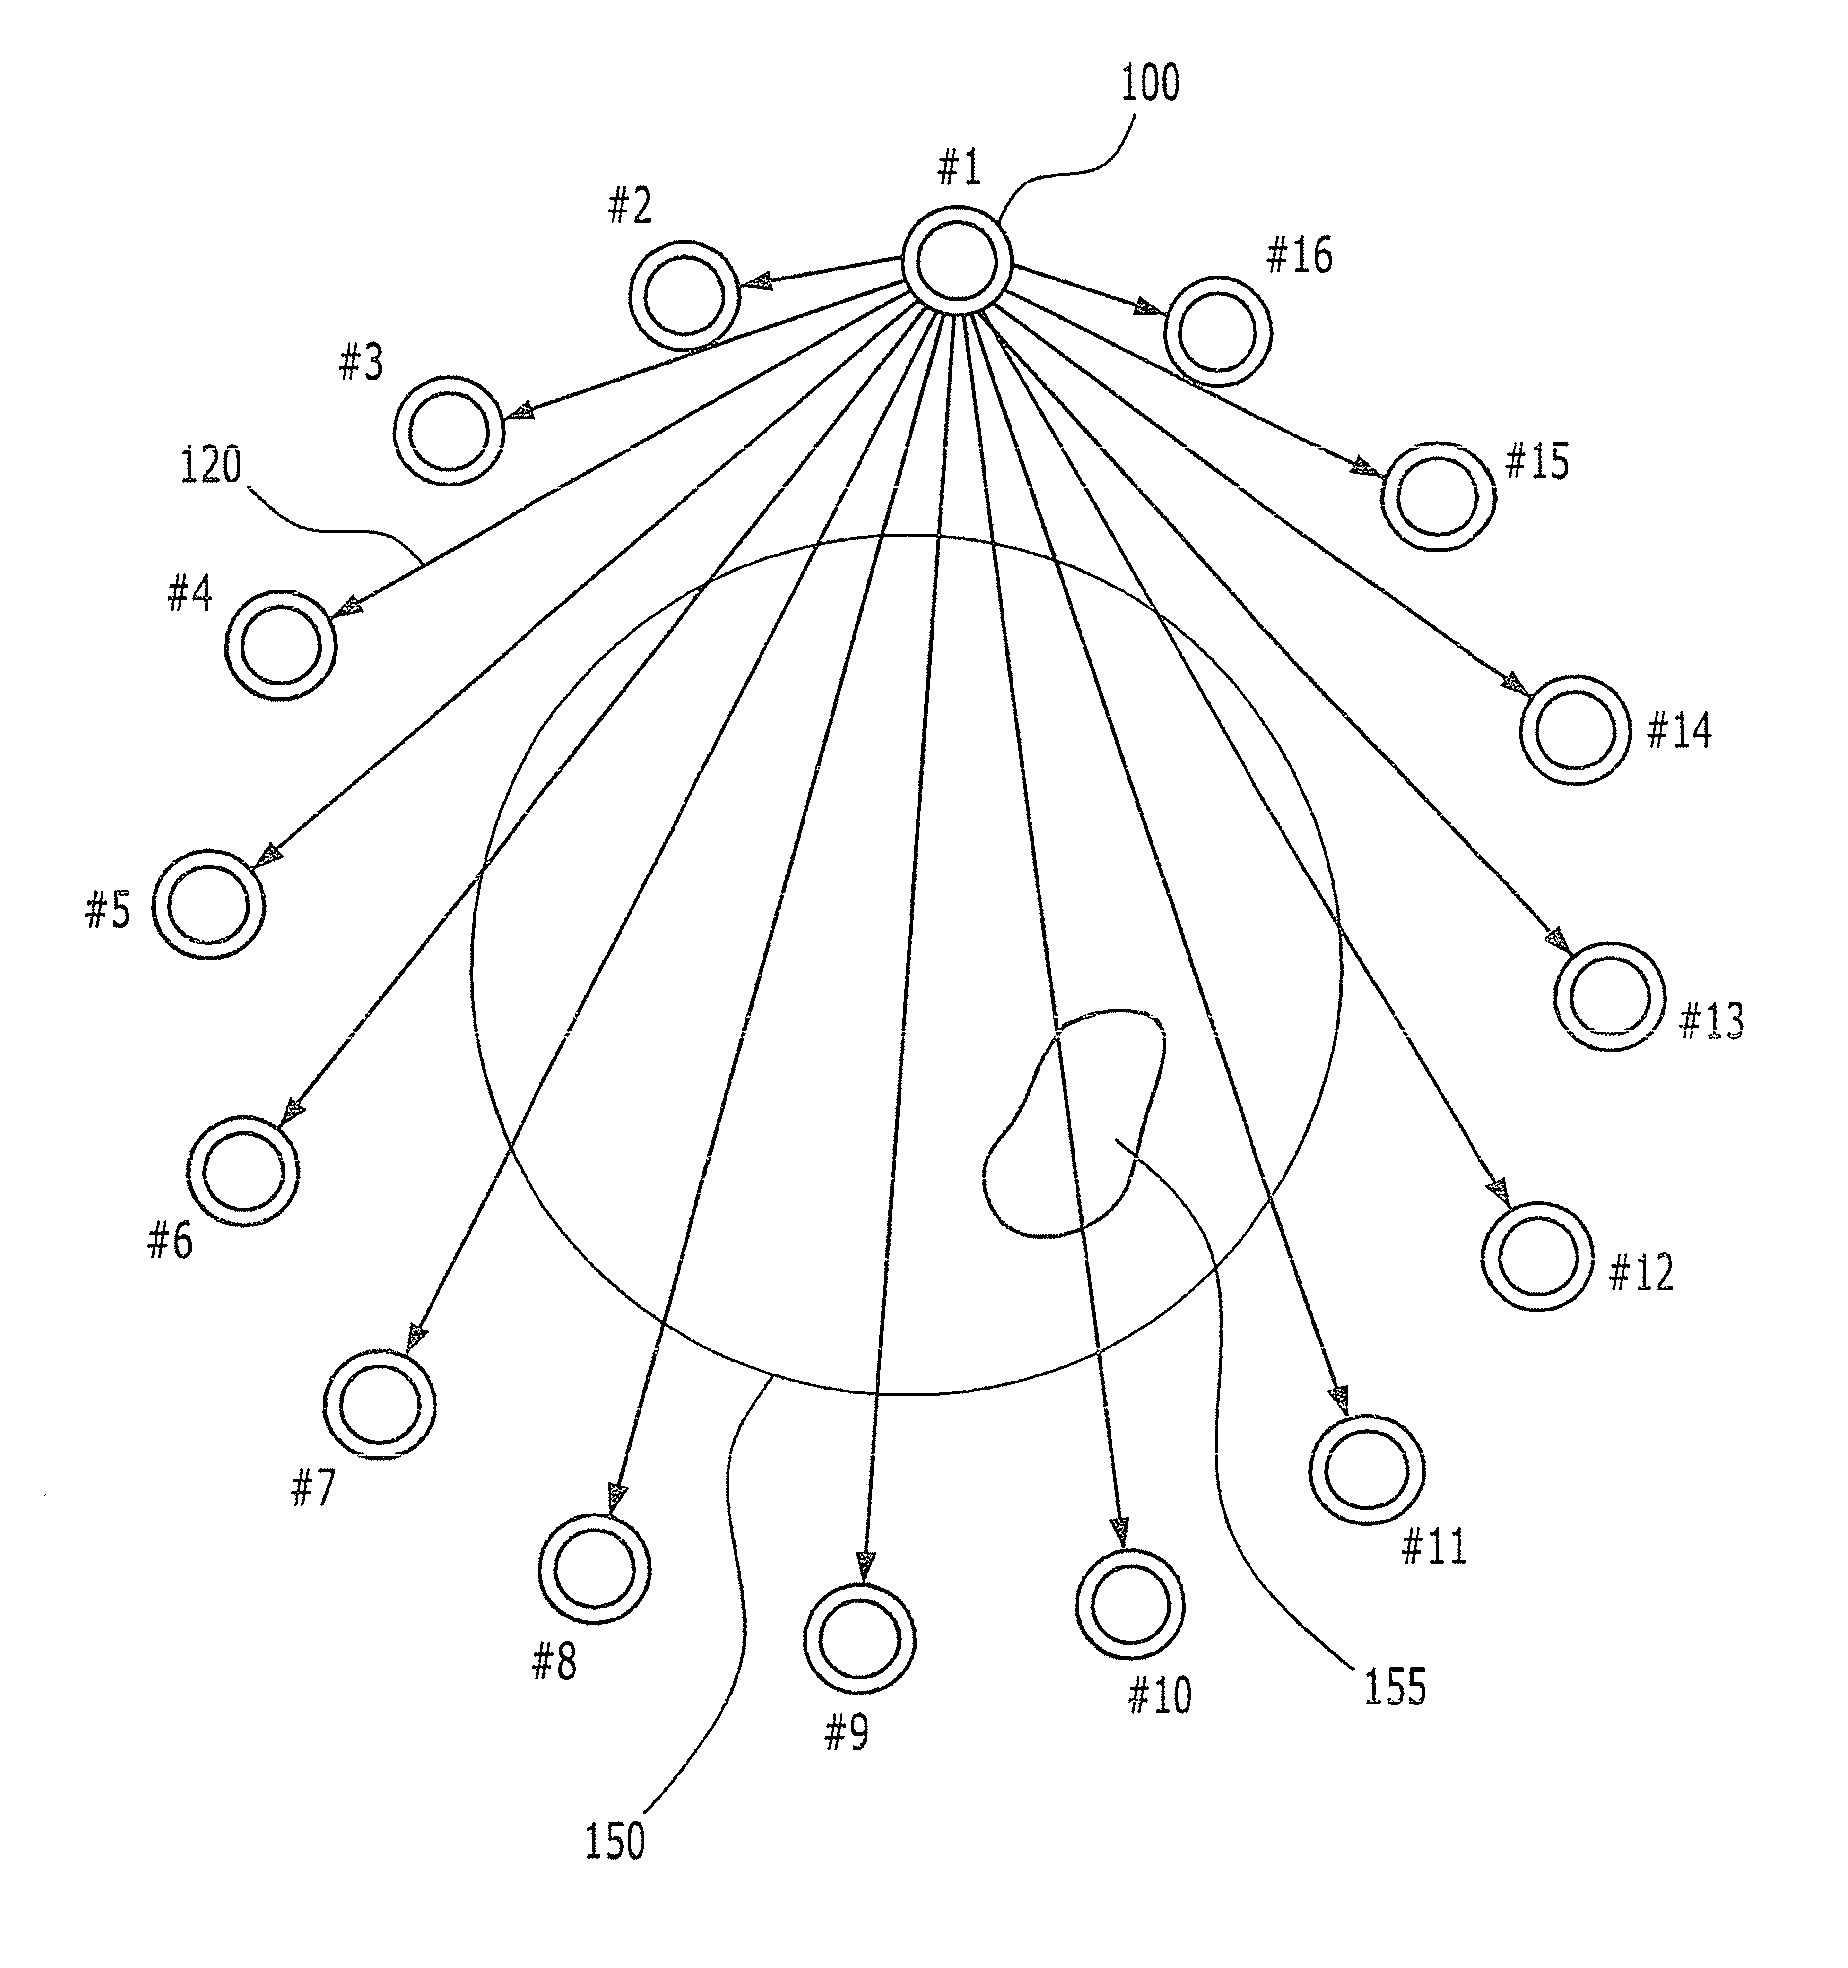 Microwave image reconstruction apparatus and method